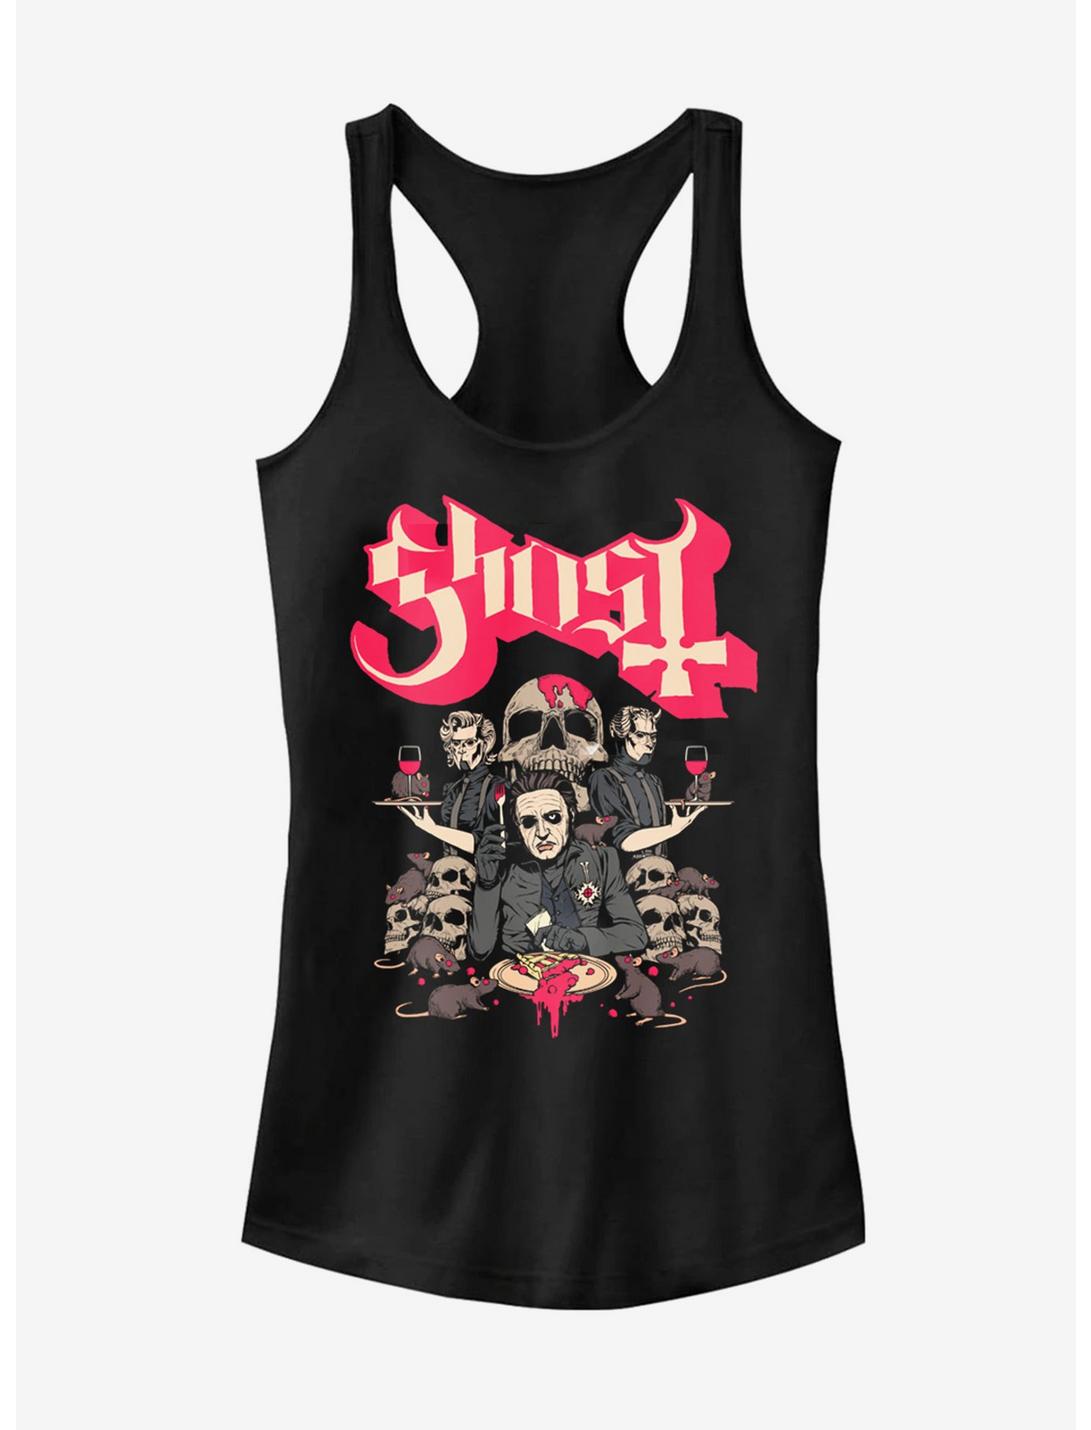 Ghost Amuse Bouche Girls Tank Top Hot Topic Exclusive, BLACK, hi-res